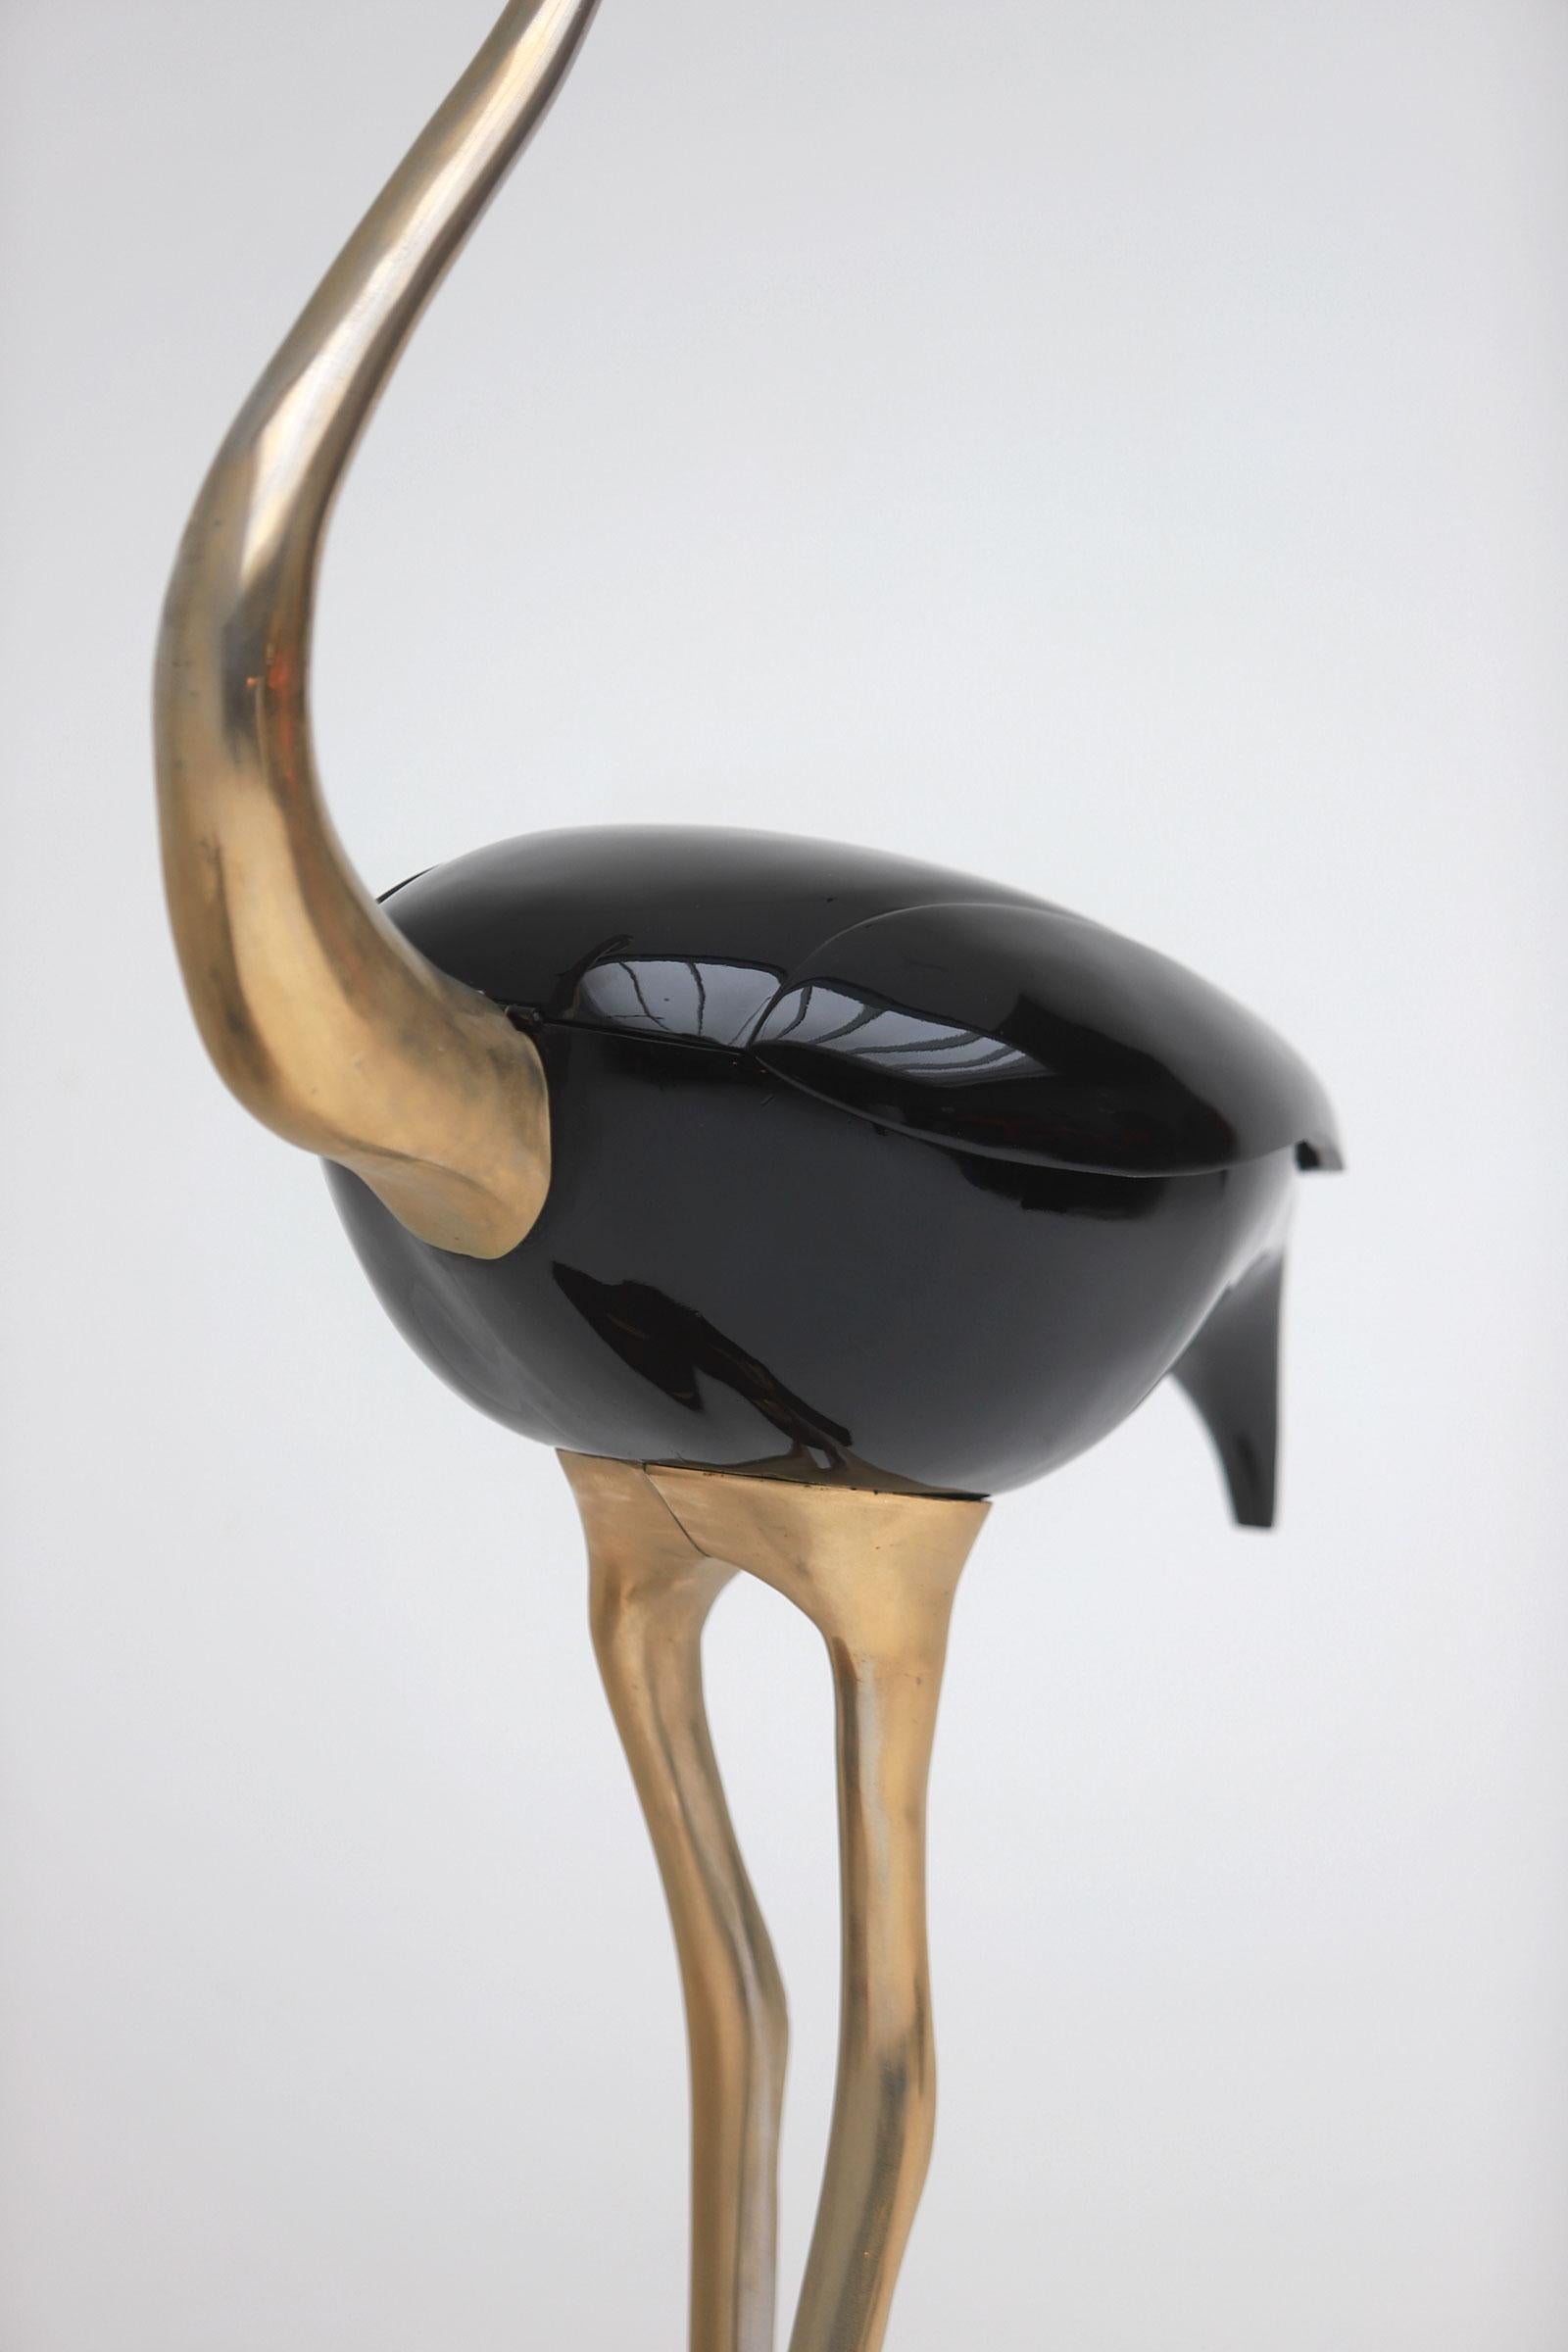 Lifesize Brass Flamingo with storage compartment by Fondica 1970s For Sale 8